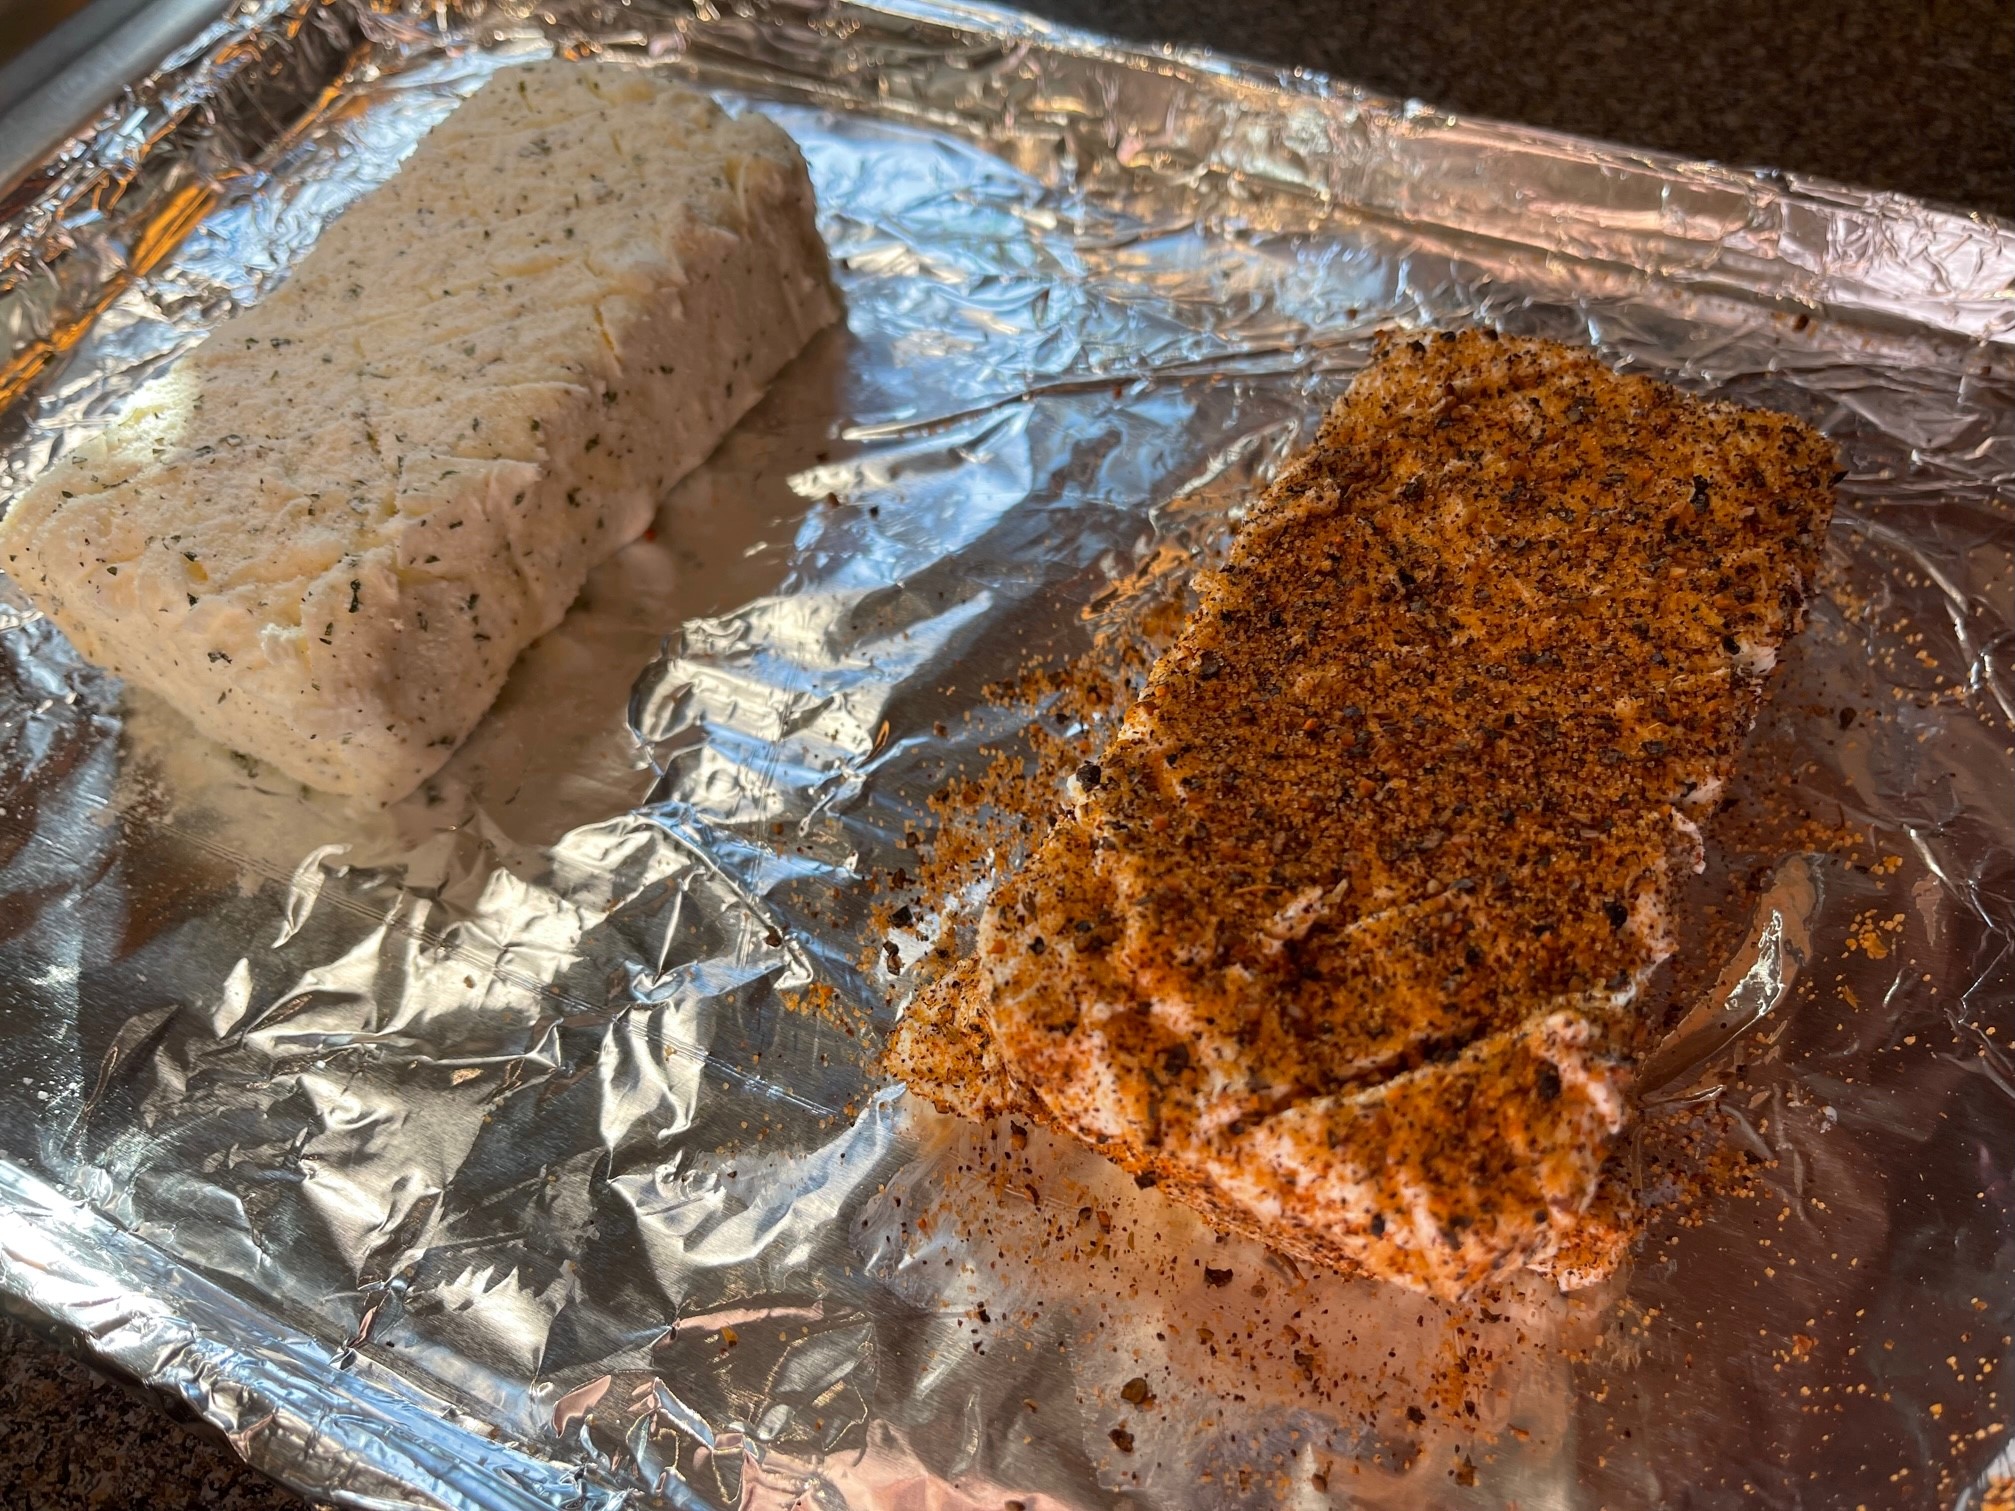 Two different kinds of cream cheese blocks